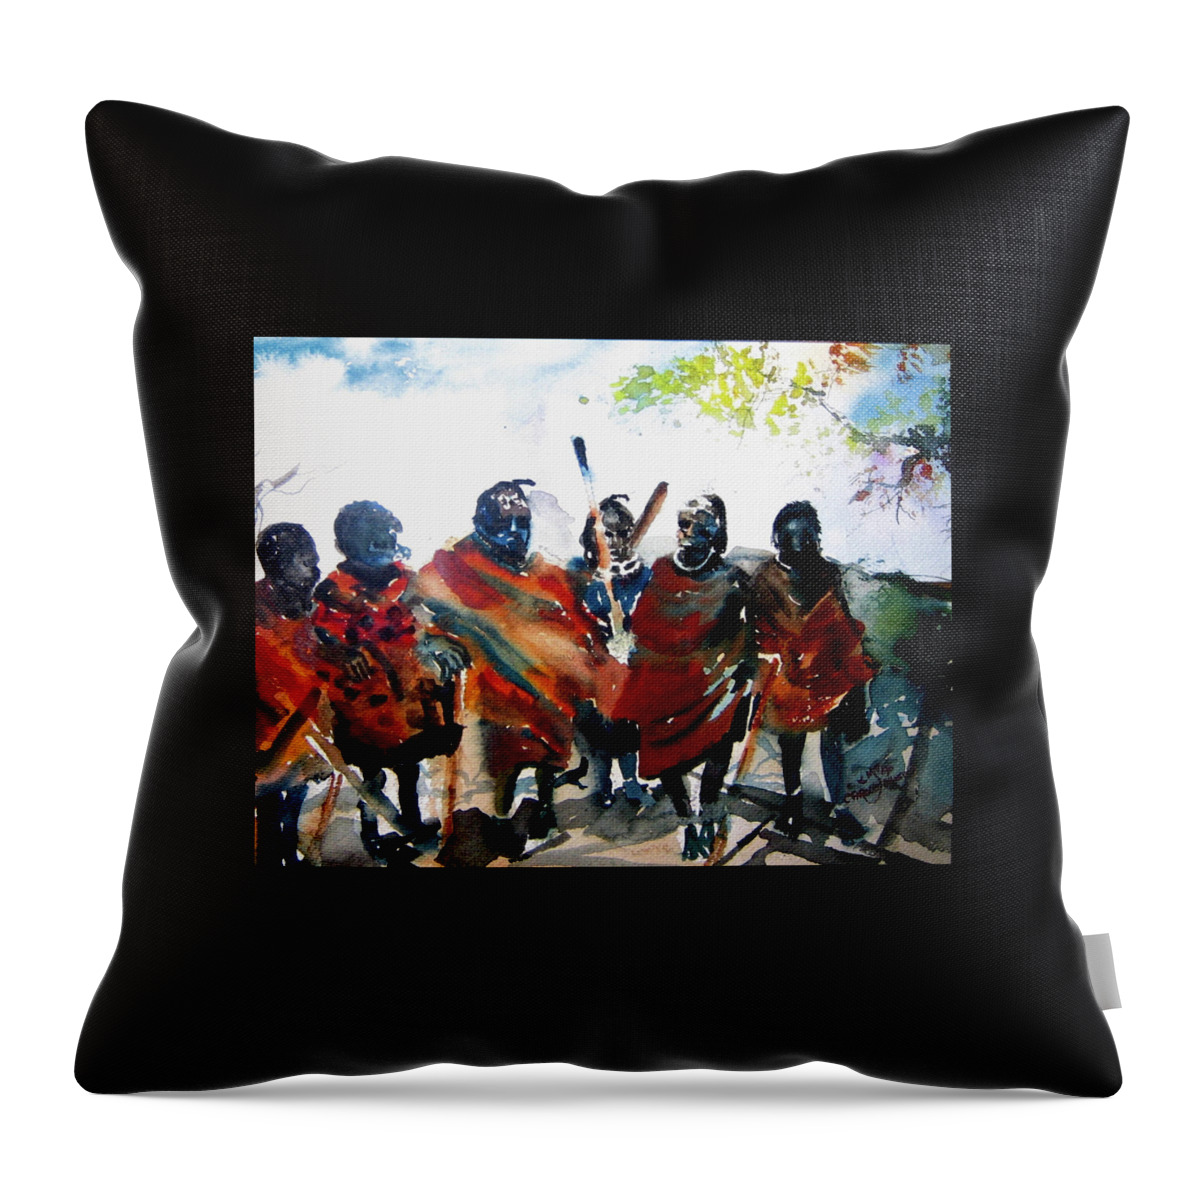 Watercolor Throw Pillow featuring the painting Masaai Boys #2 by Carole Johnson